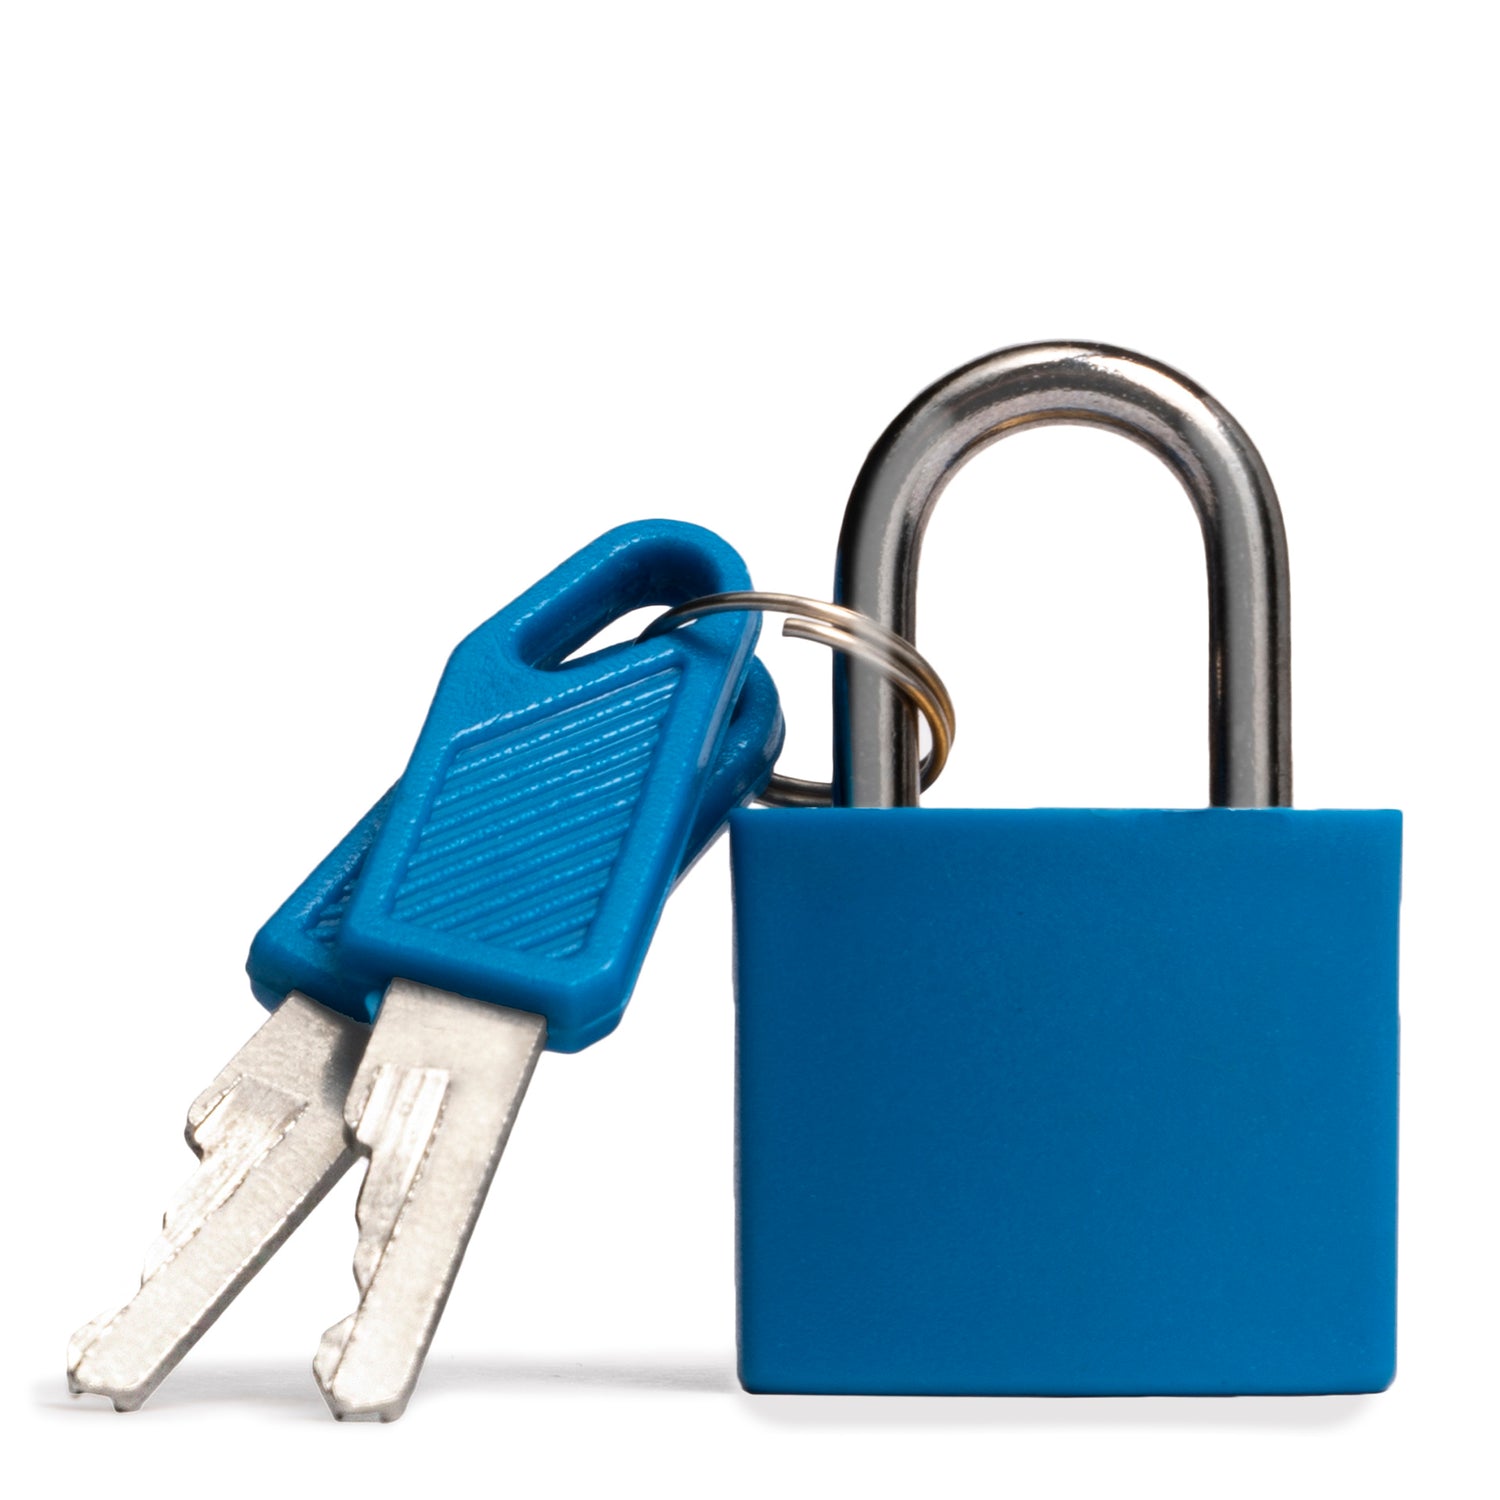 Two blue keys leaning on a blue lock designed by tracker showing its ABS texture and shiny metal.